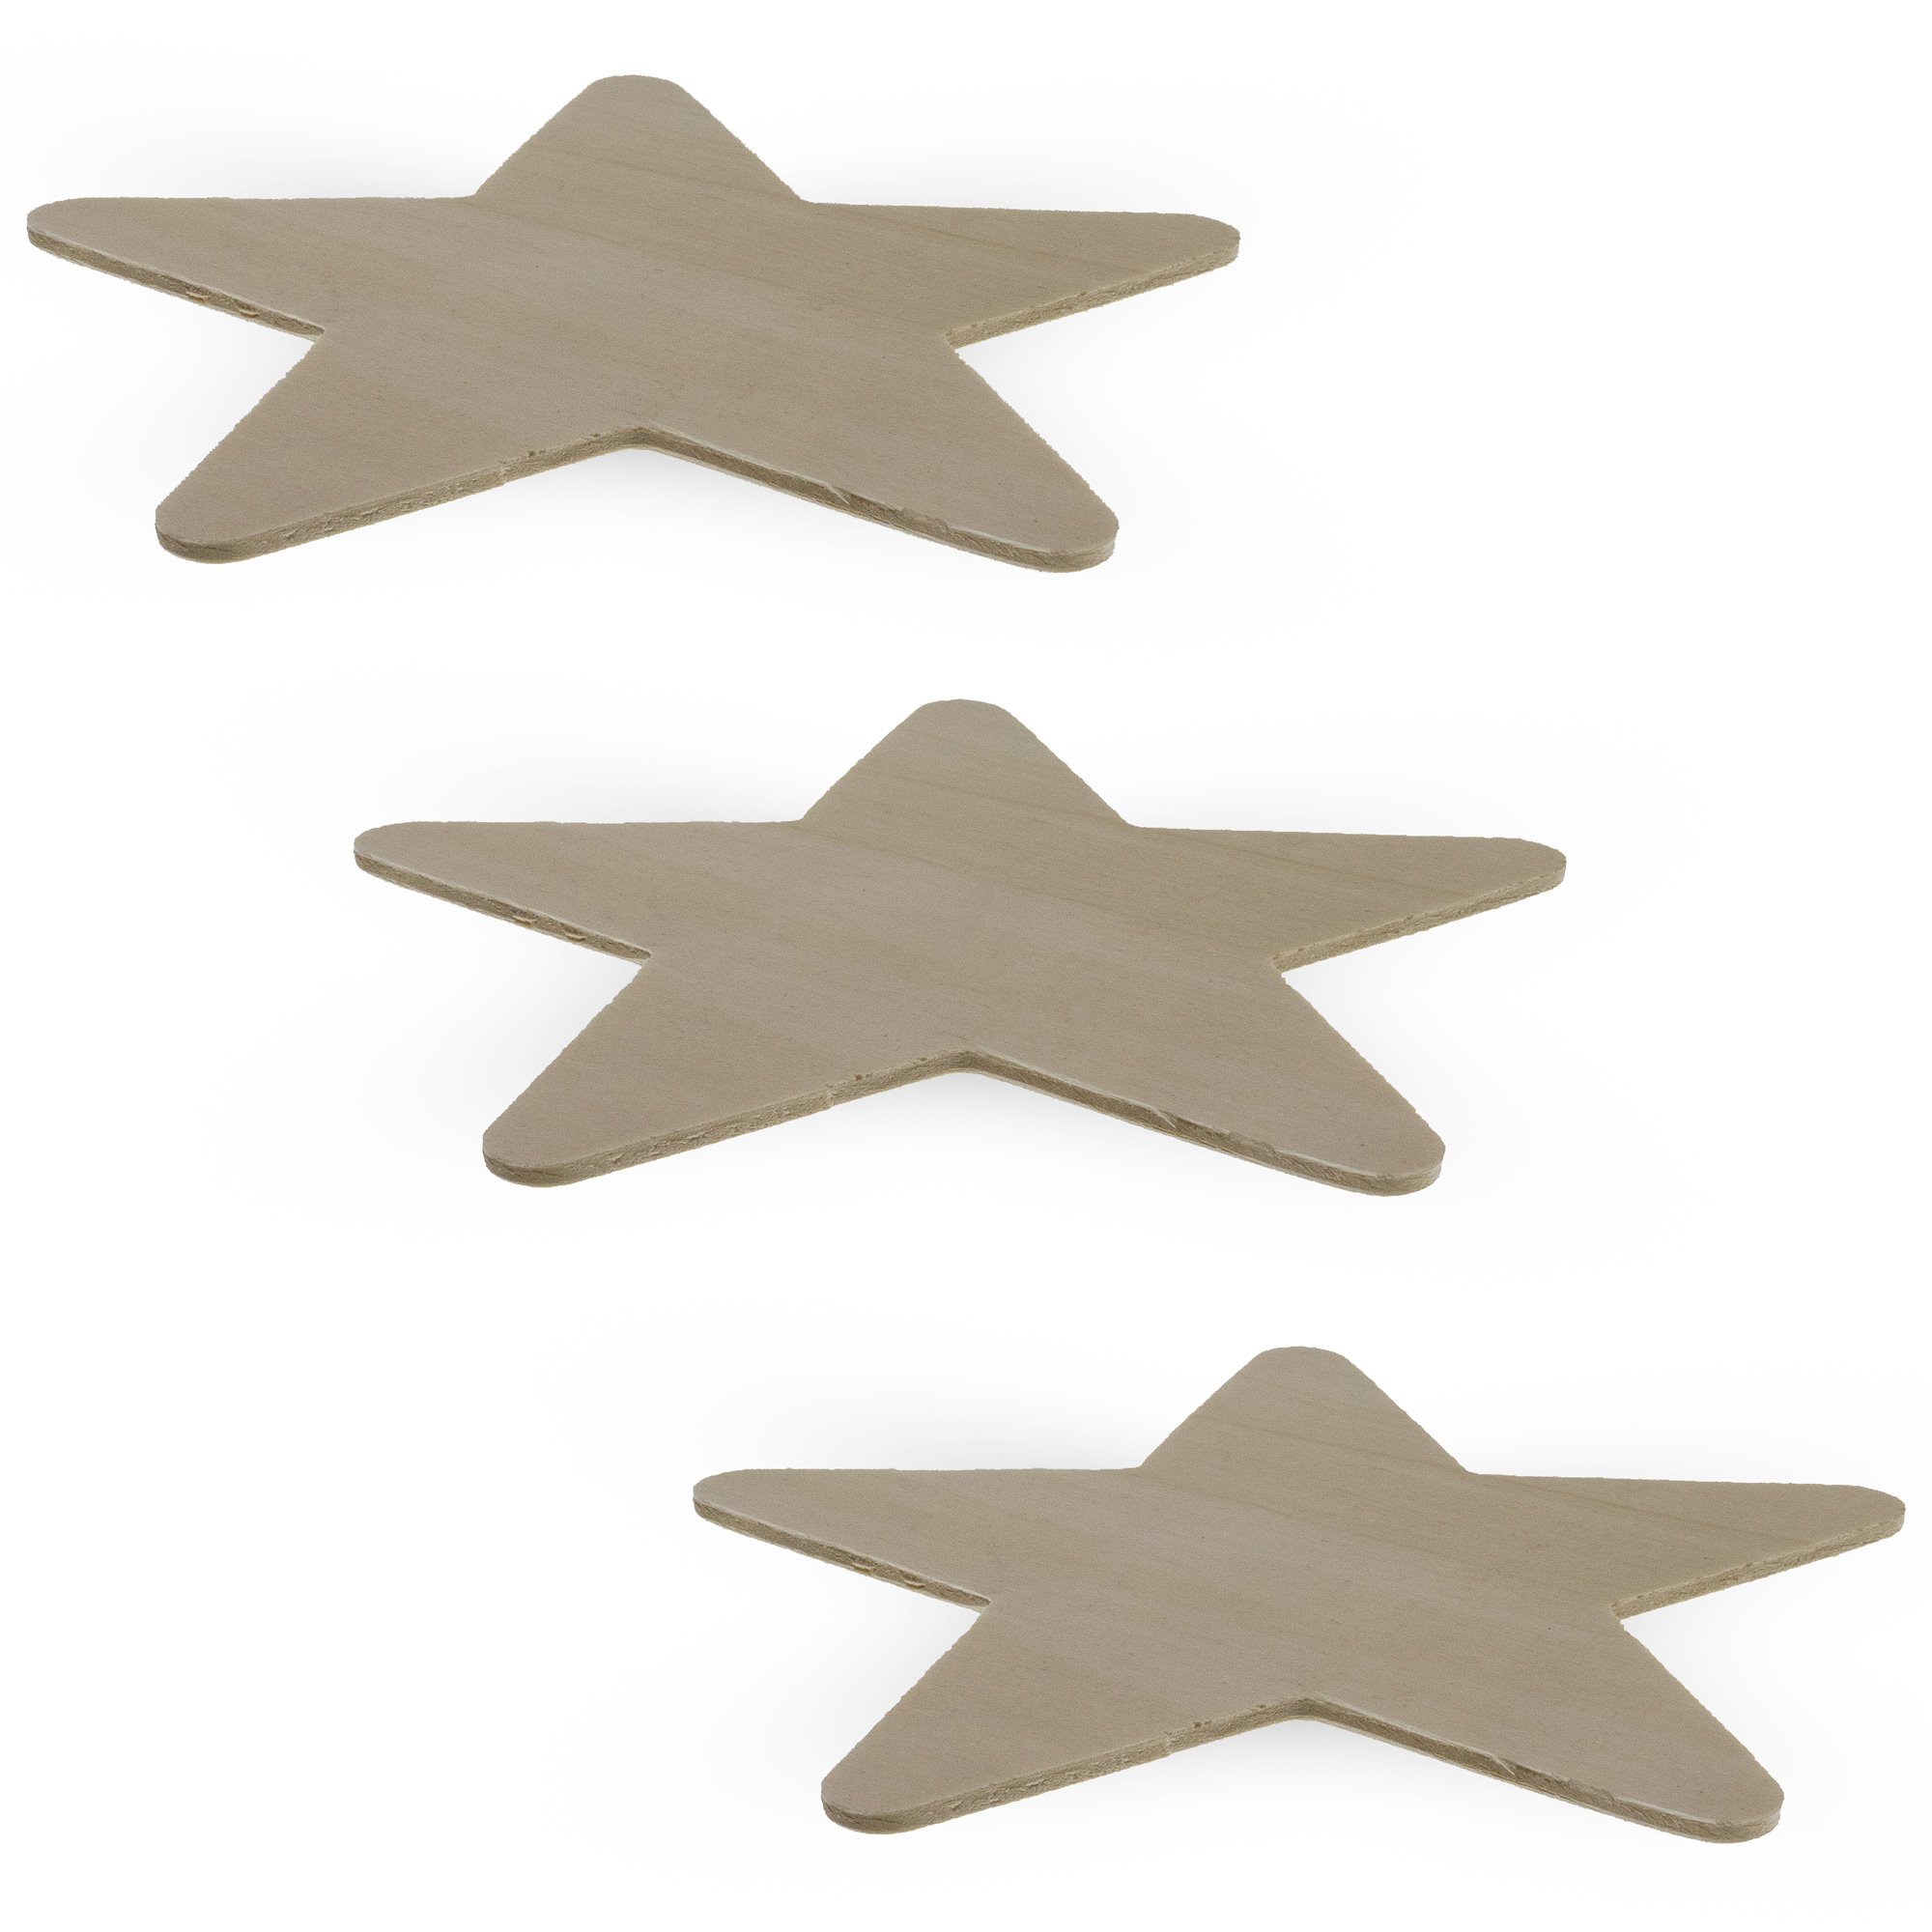 3 Unfinished Wooden Star Shapes Cutouts DIY Crafts 3.9 Inches - image 2 of 2